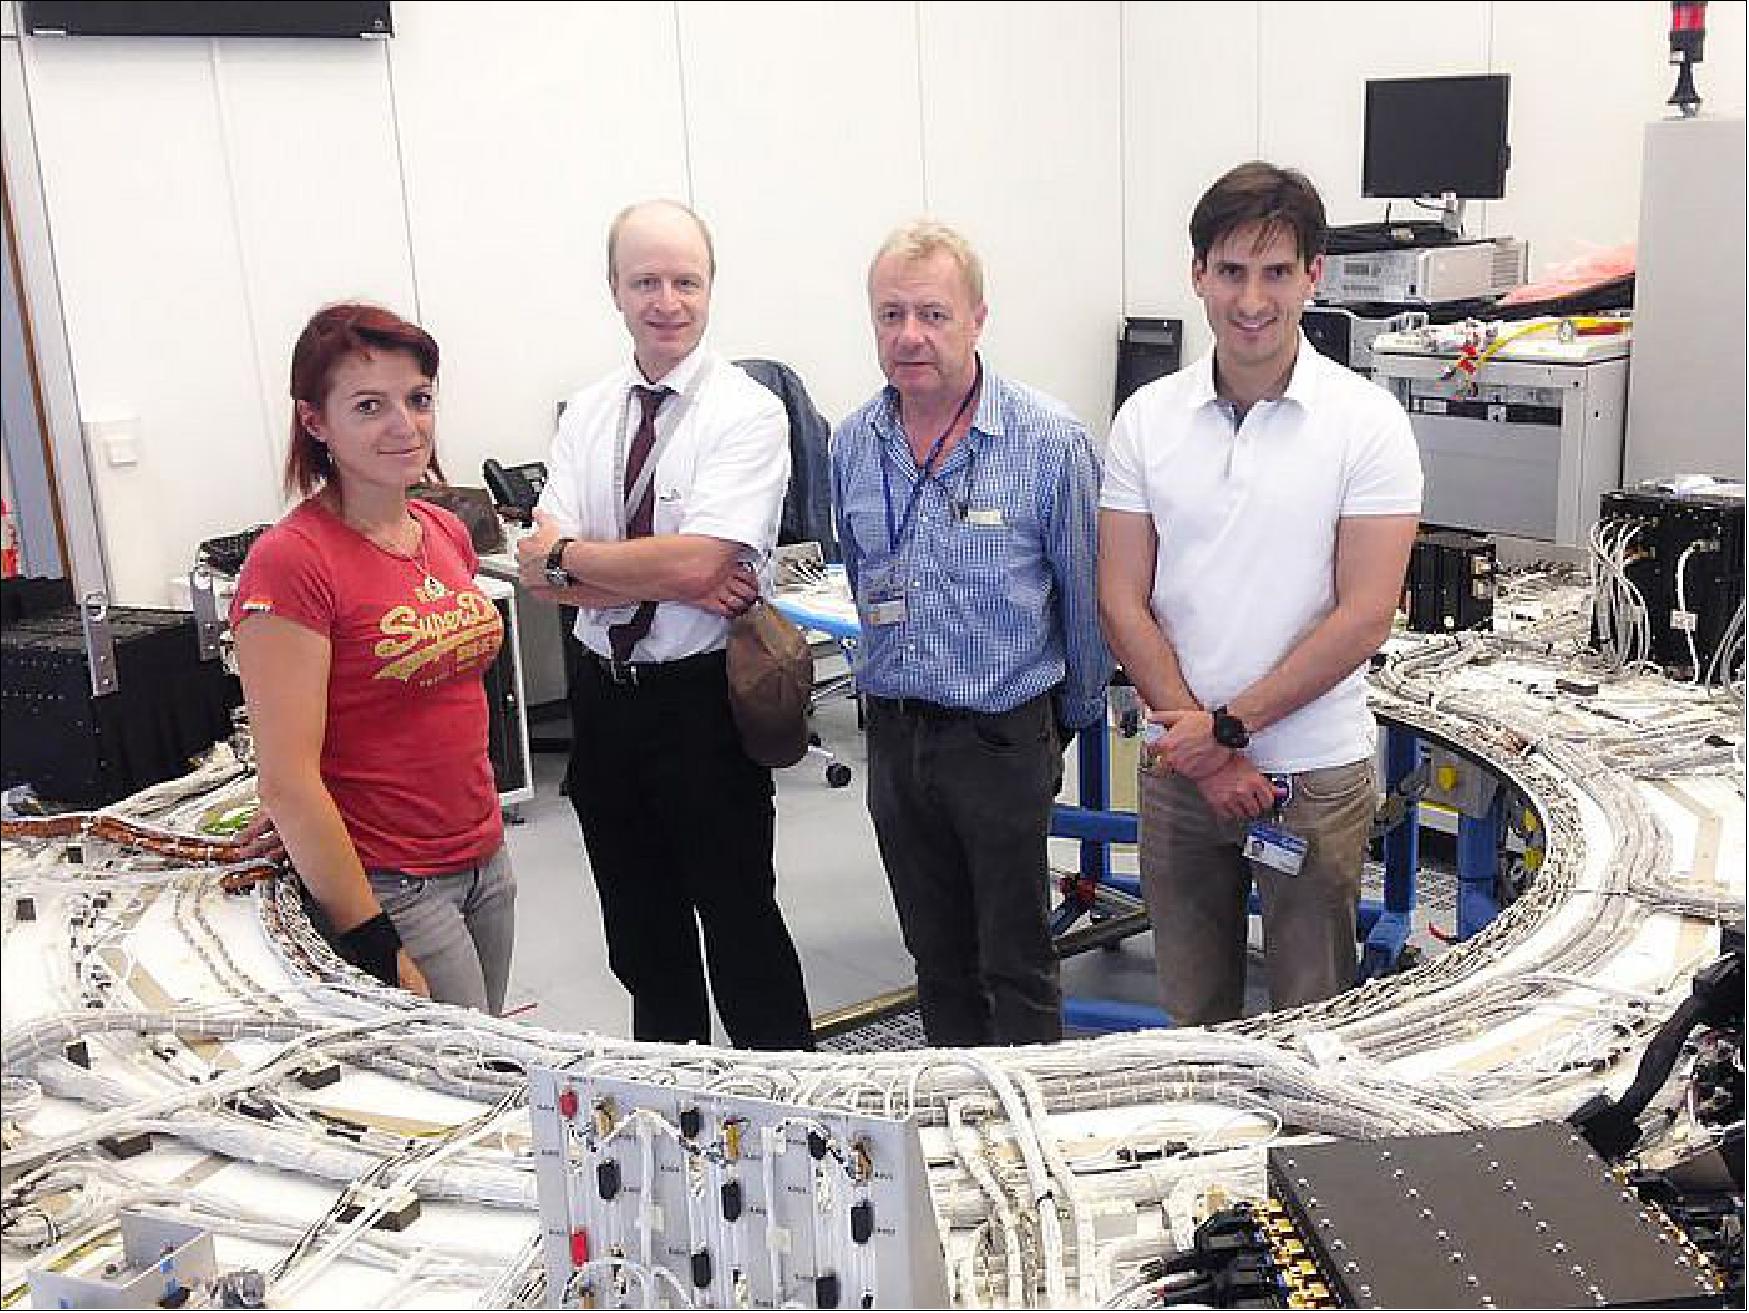 Figure 87: Photo of the Gaia avionics model at ESOC to be used by flight control personnel. In the image (L-R): Sonia Perez, Andreas Rudolph, Kevin Kewin, Guillermo Lorenzo (image credit: ESA/L. Guilpain - CC BY-SA IGO 3.0)